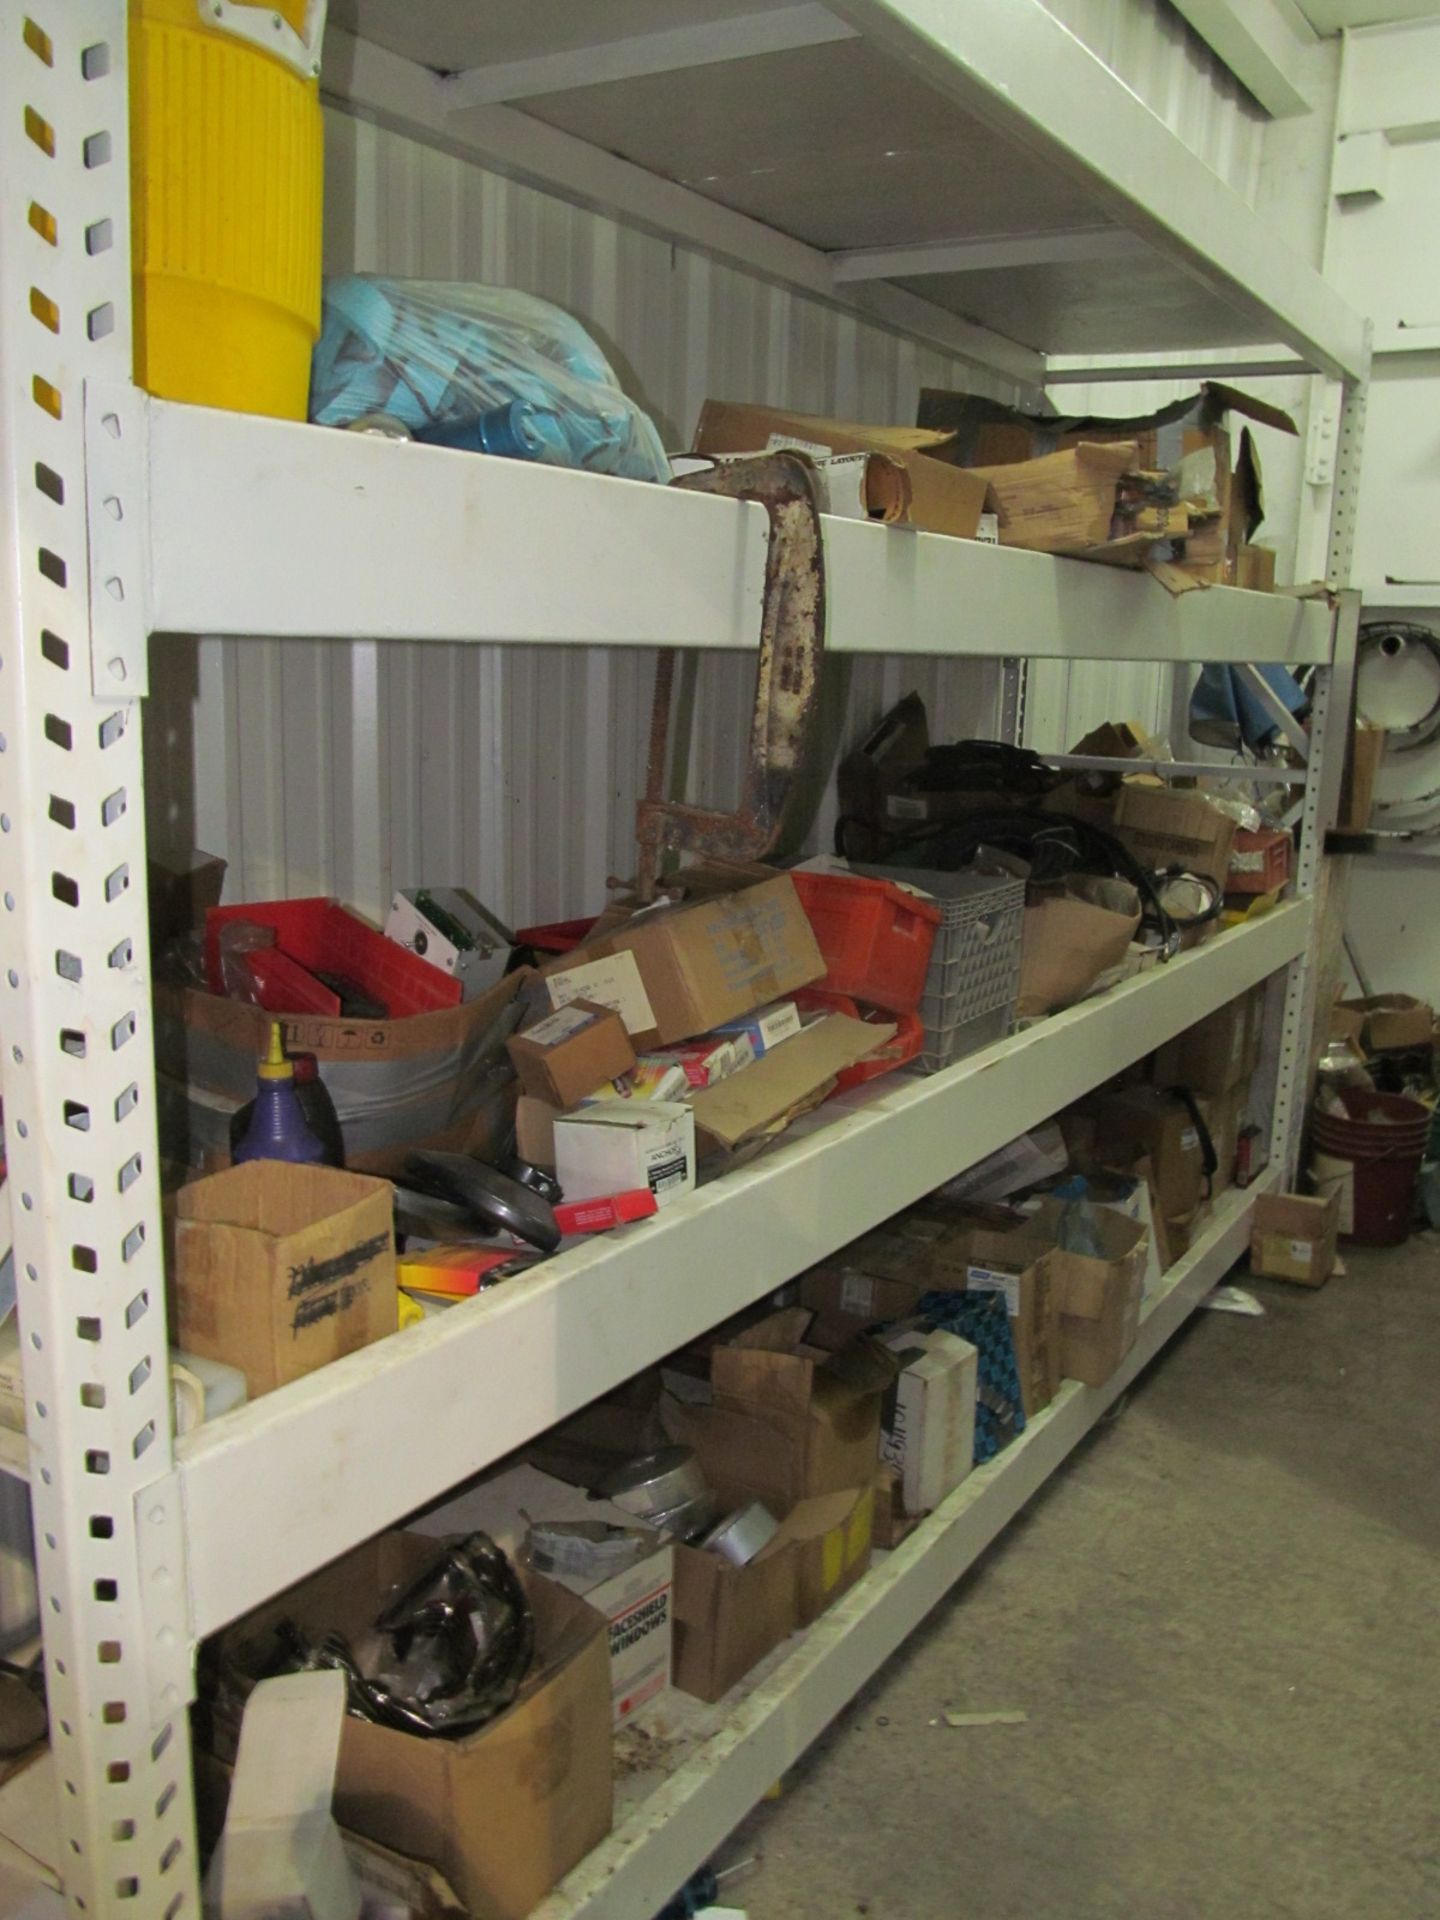 Lot Consisting Of Contents Of Room ; Including; Welder Parts, Welding Rod, Abrasives, Gloves & Other